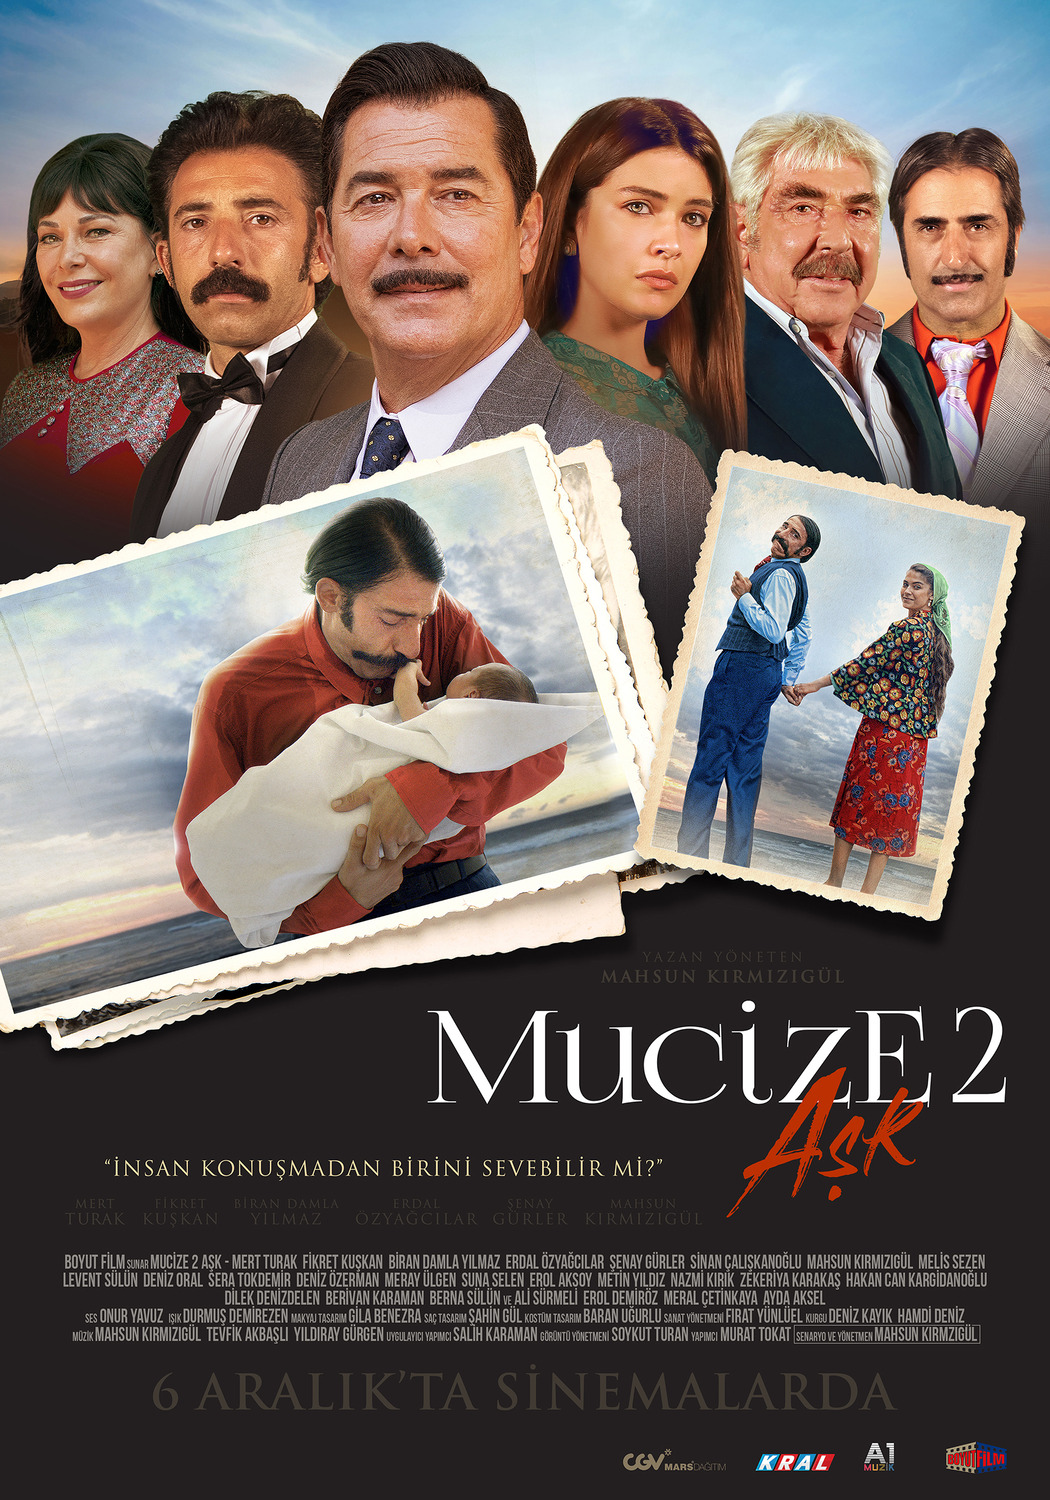 Extra Large Movie Poster Image for Mucize 2: Ask (#3 of 4)